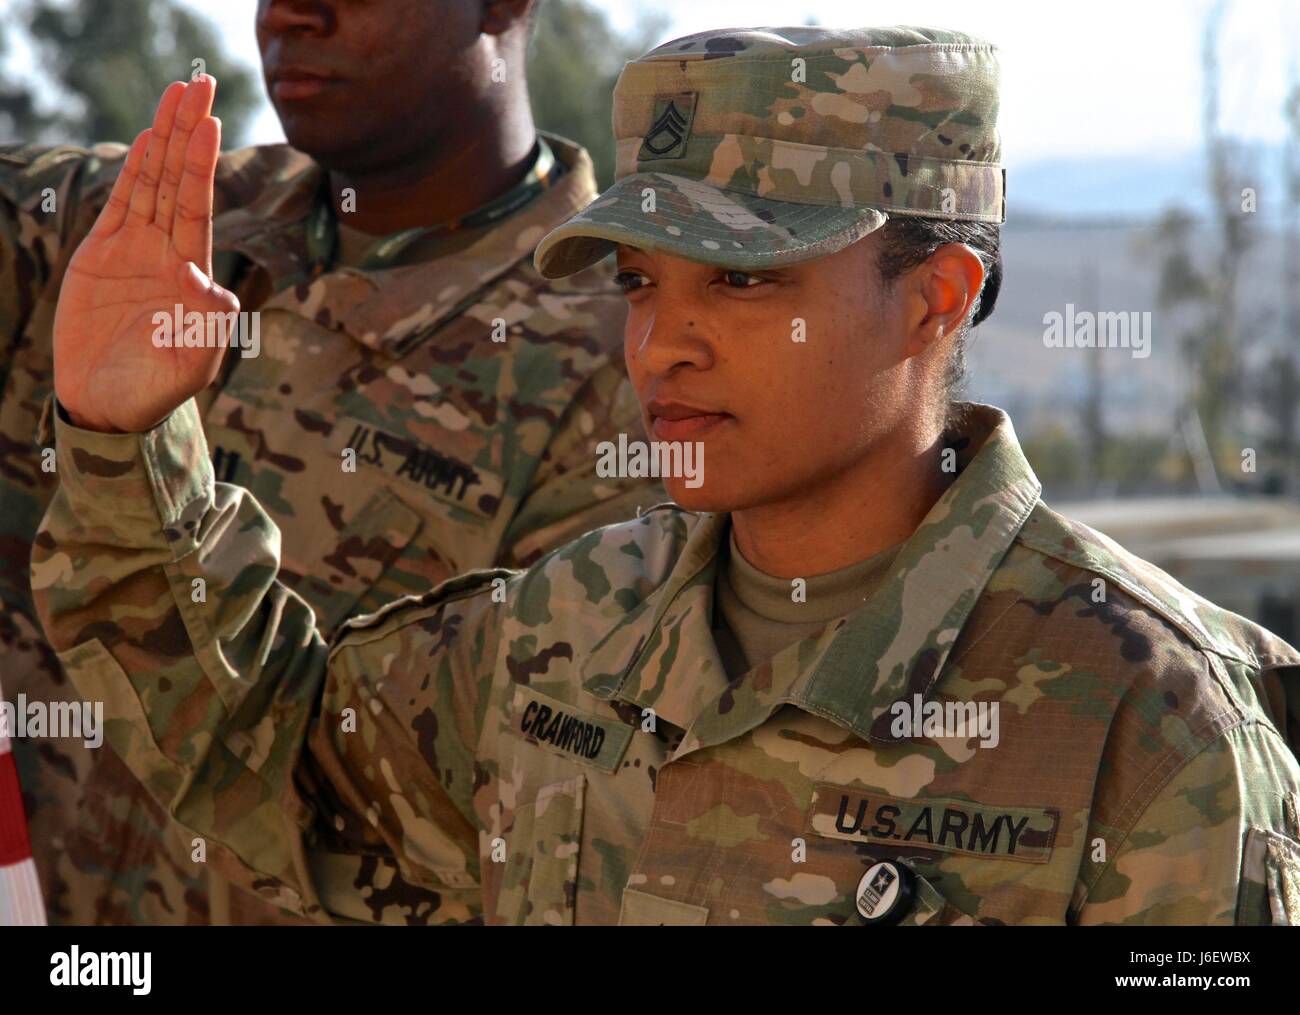 Staff Sgt. Christal Crawford, USARCENT broadcast specialist, takes the oath of enlistment, May 5, 2017, during exercise Eager Lion in Jordan. Stock Photo